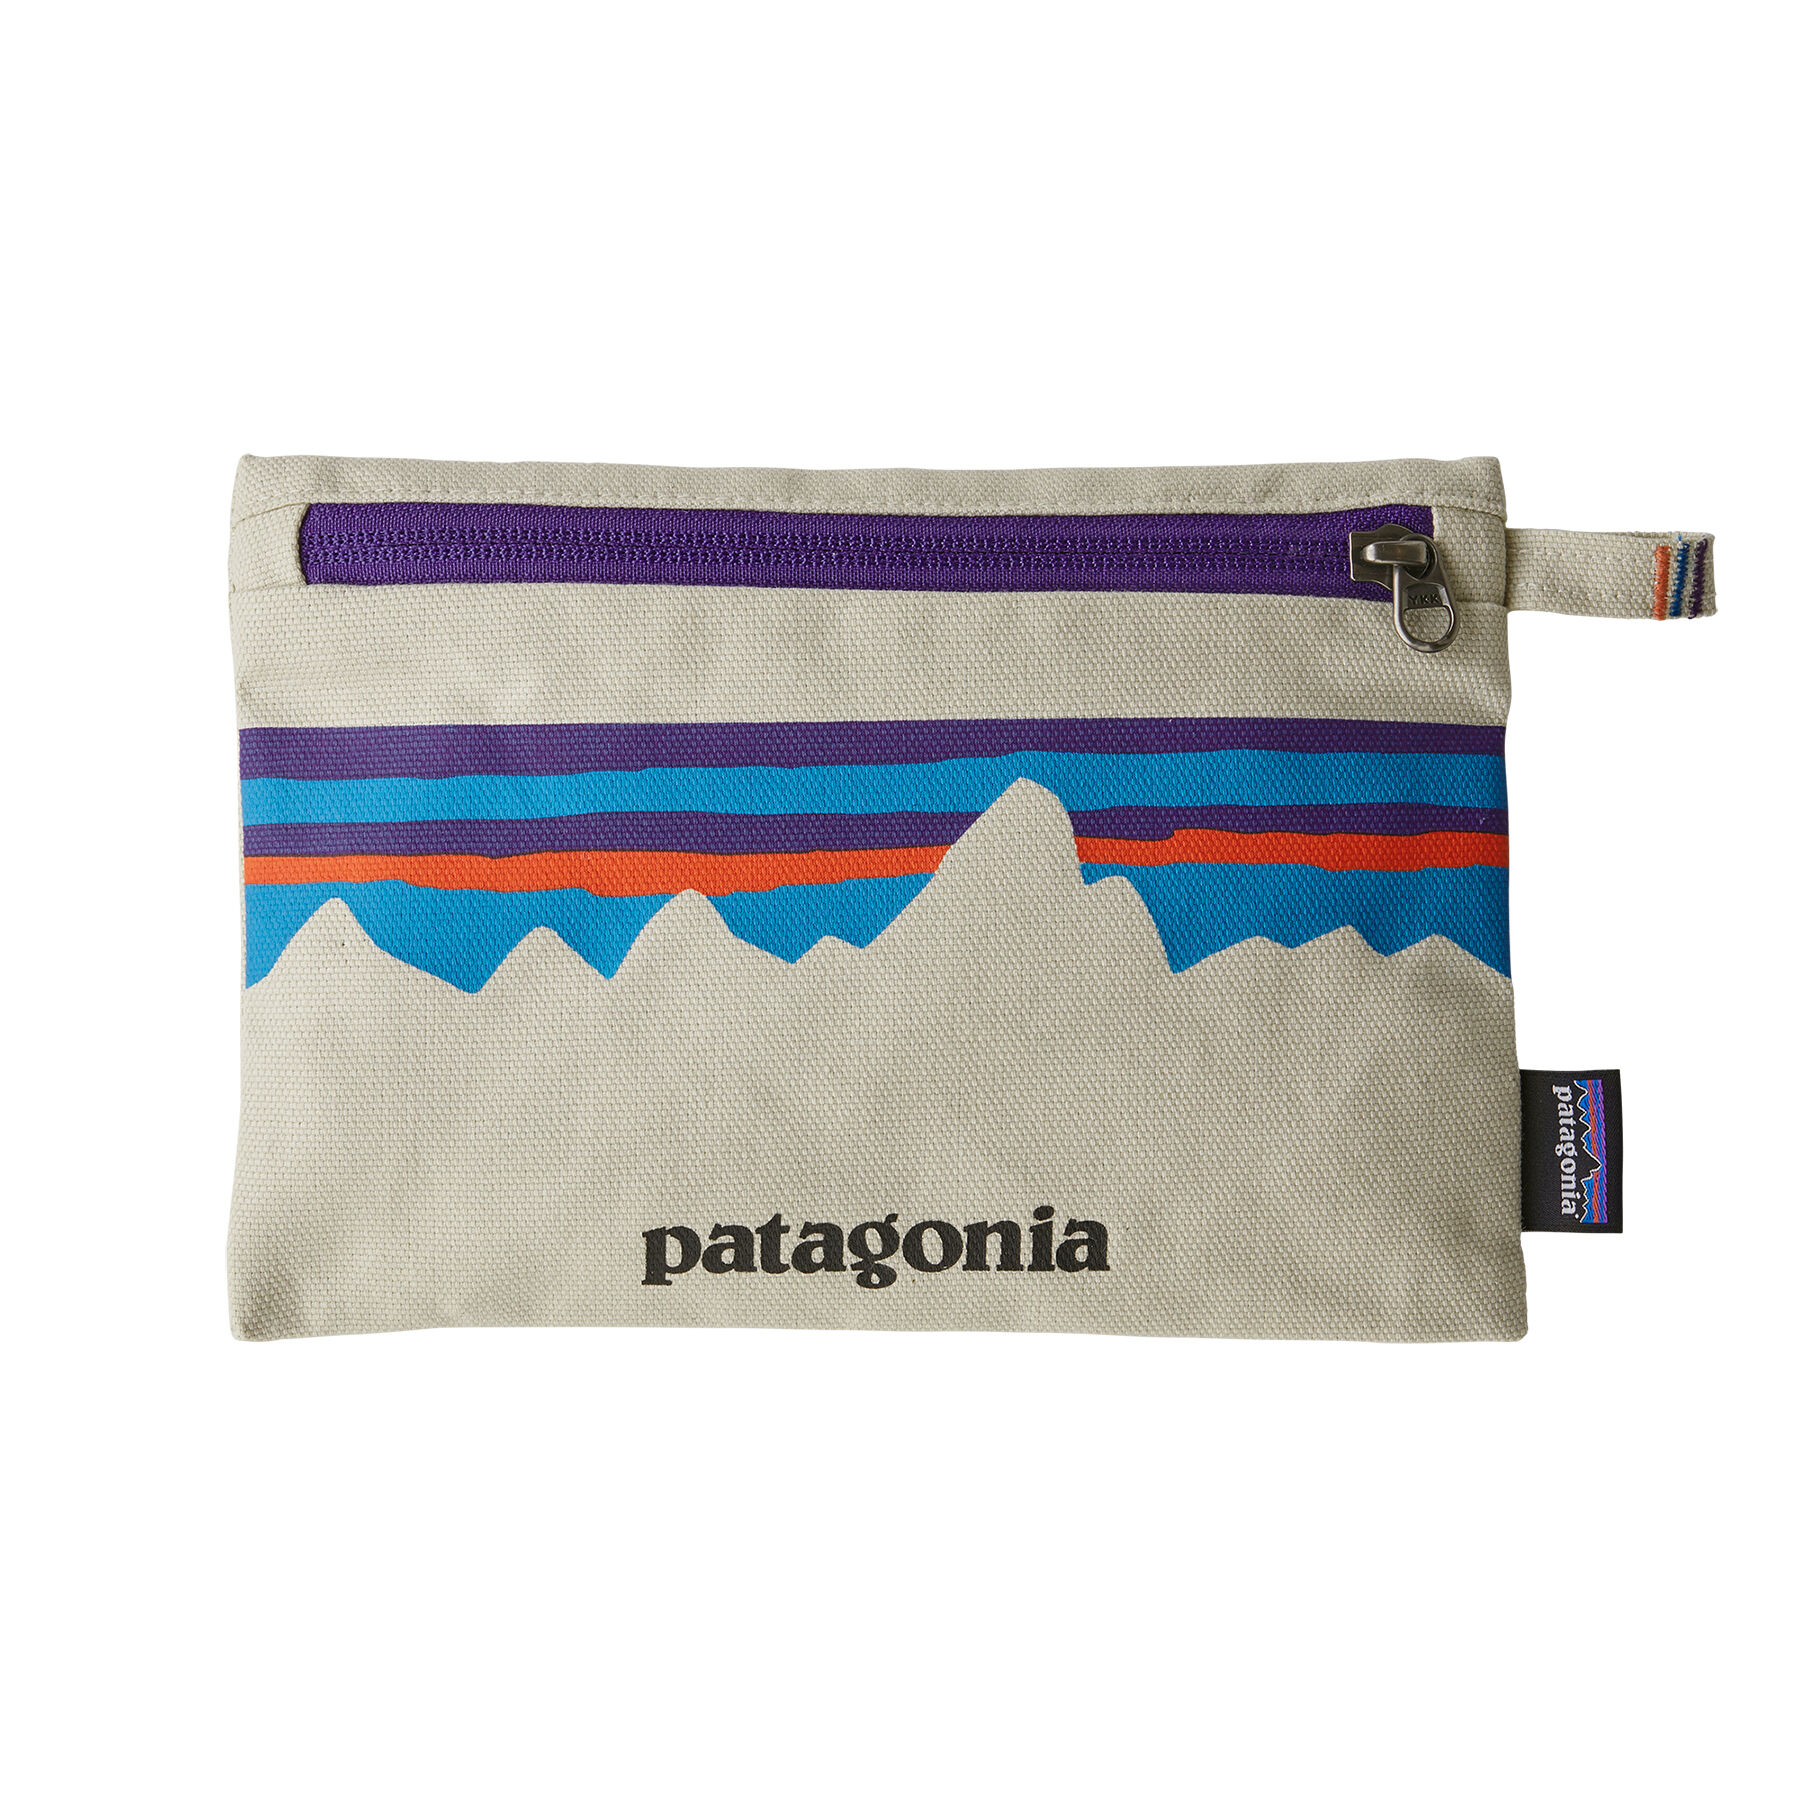 Patagonia Zippered Pouch - Tas